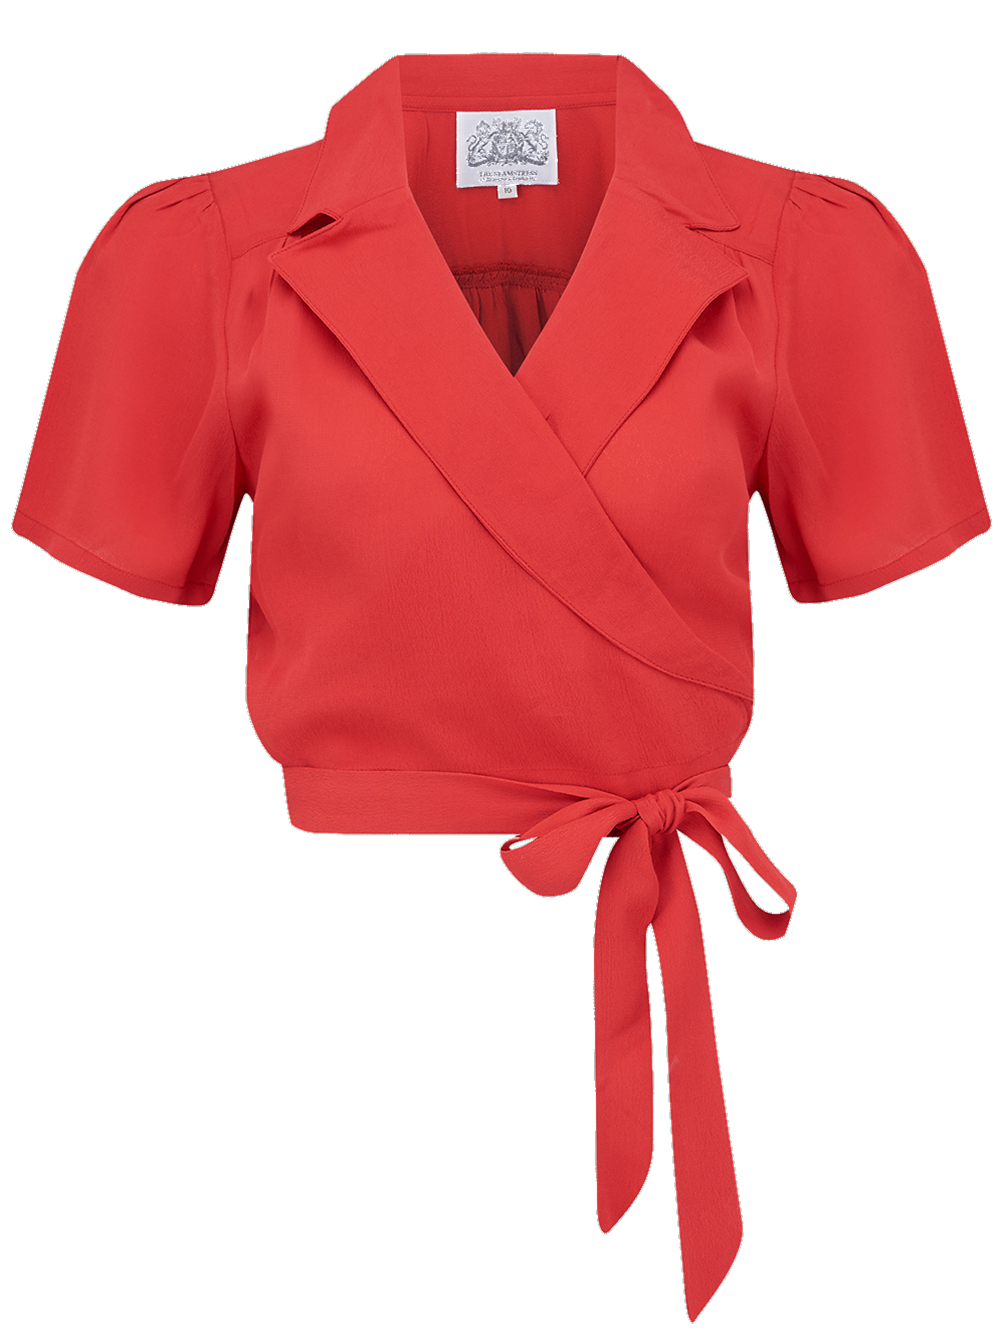 "Greta" Wrap Blouse in Red, Classic & Authentic 1940s Vintage Inspired Style - CC41, Goodwood Revival, Twinwood Festival, Viva Las Vegas Rockabilly Weekend Rock n Romance The Seamstress Of Bloomsbury